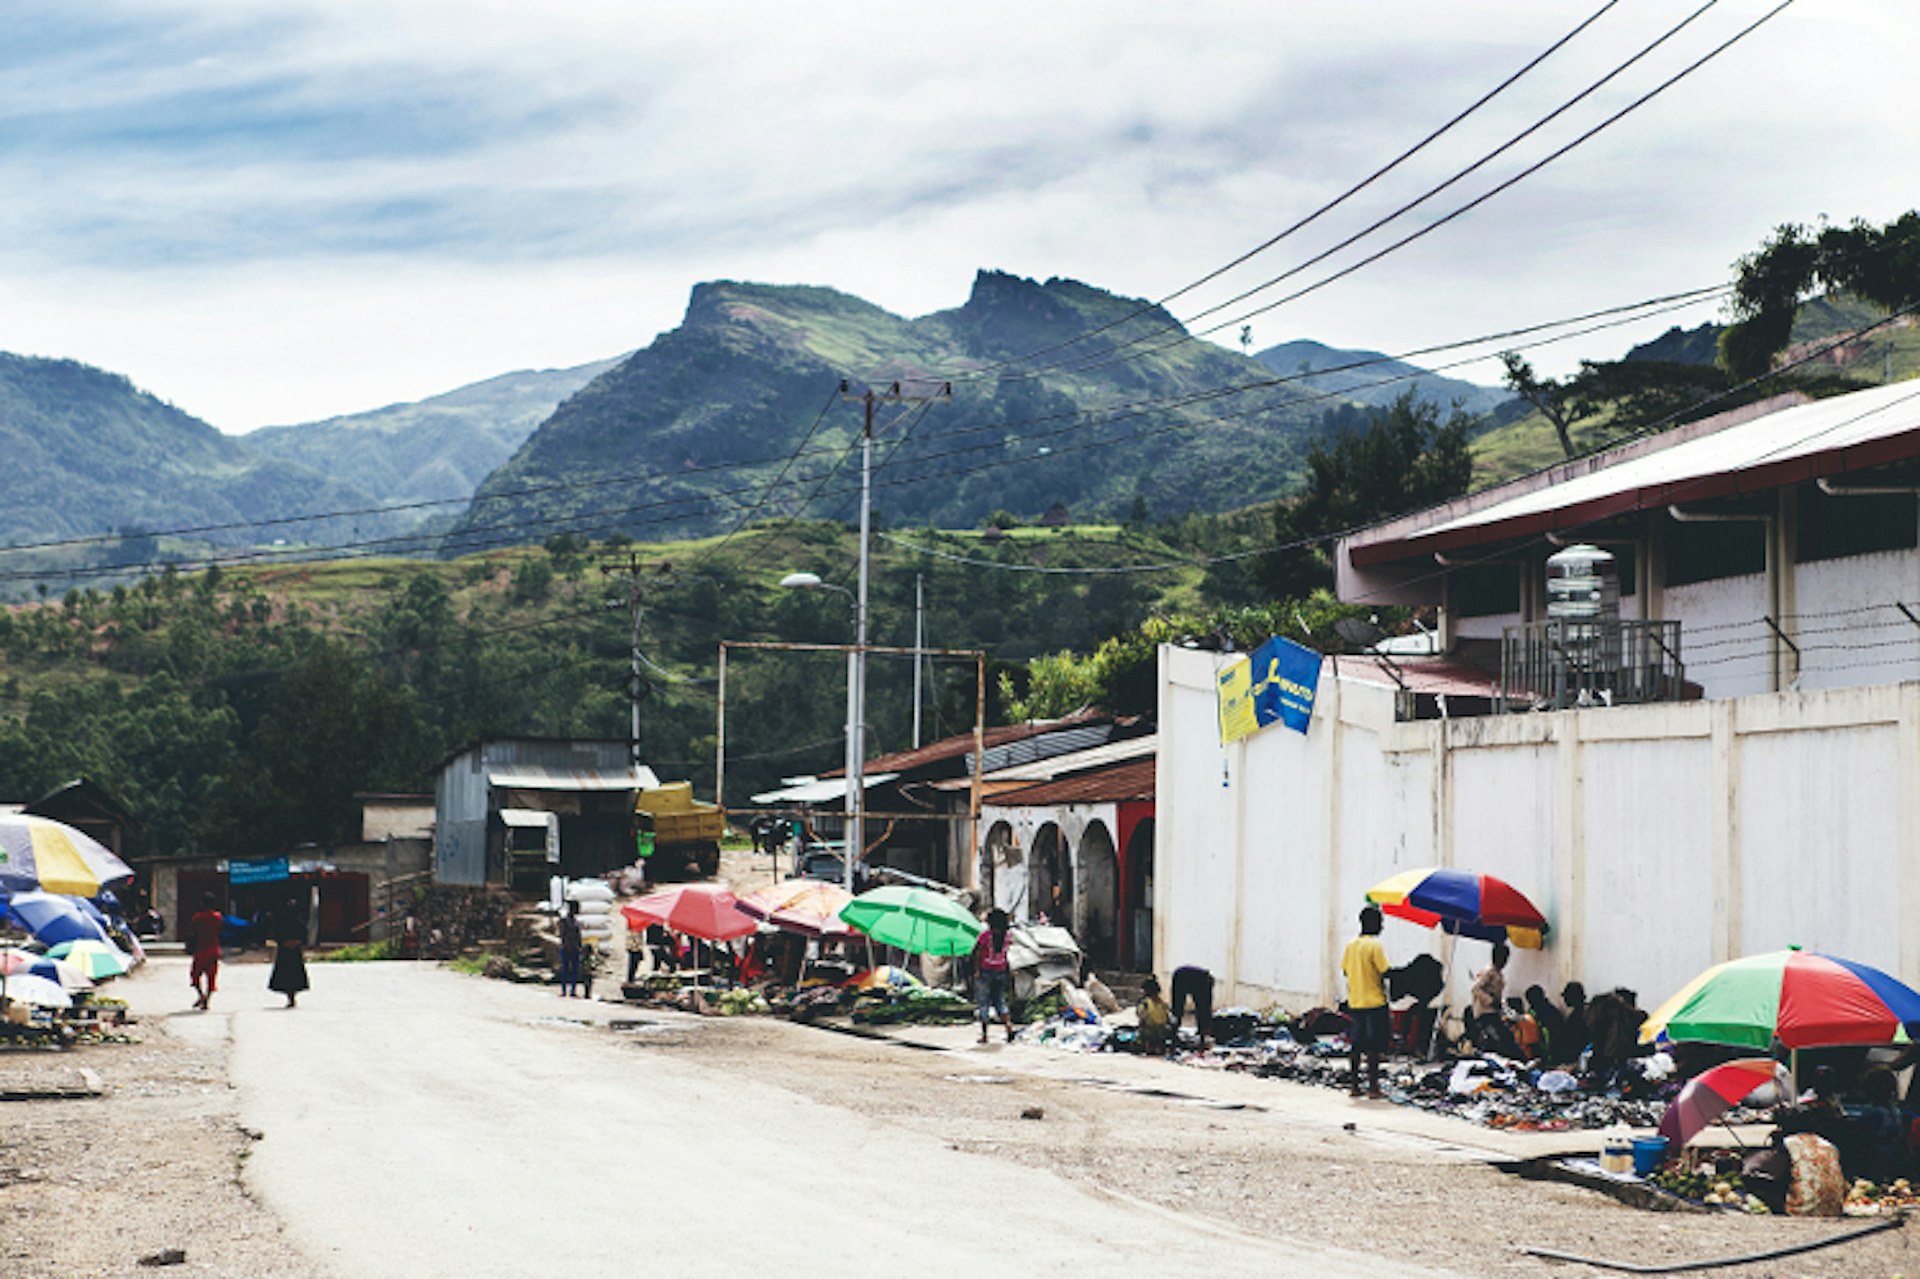 The village of Maubisse, en route to Mt Ramelou, Timor-Leste. Image by Brian Oh